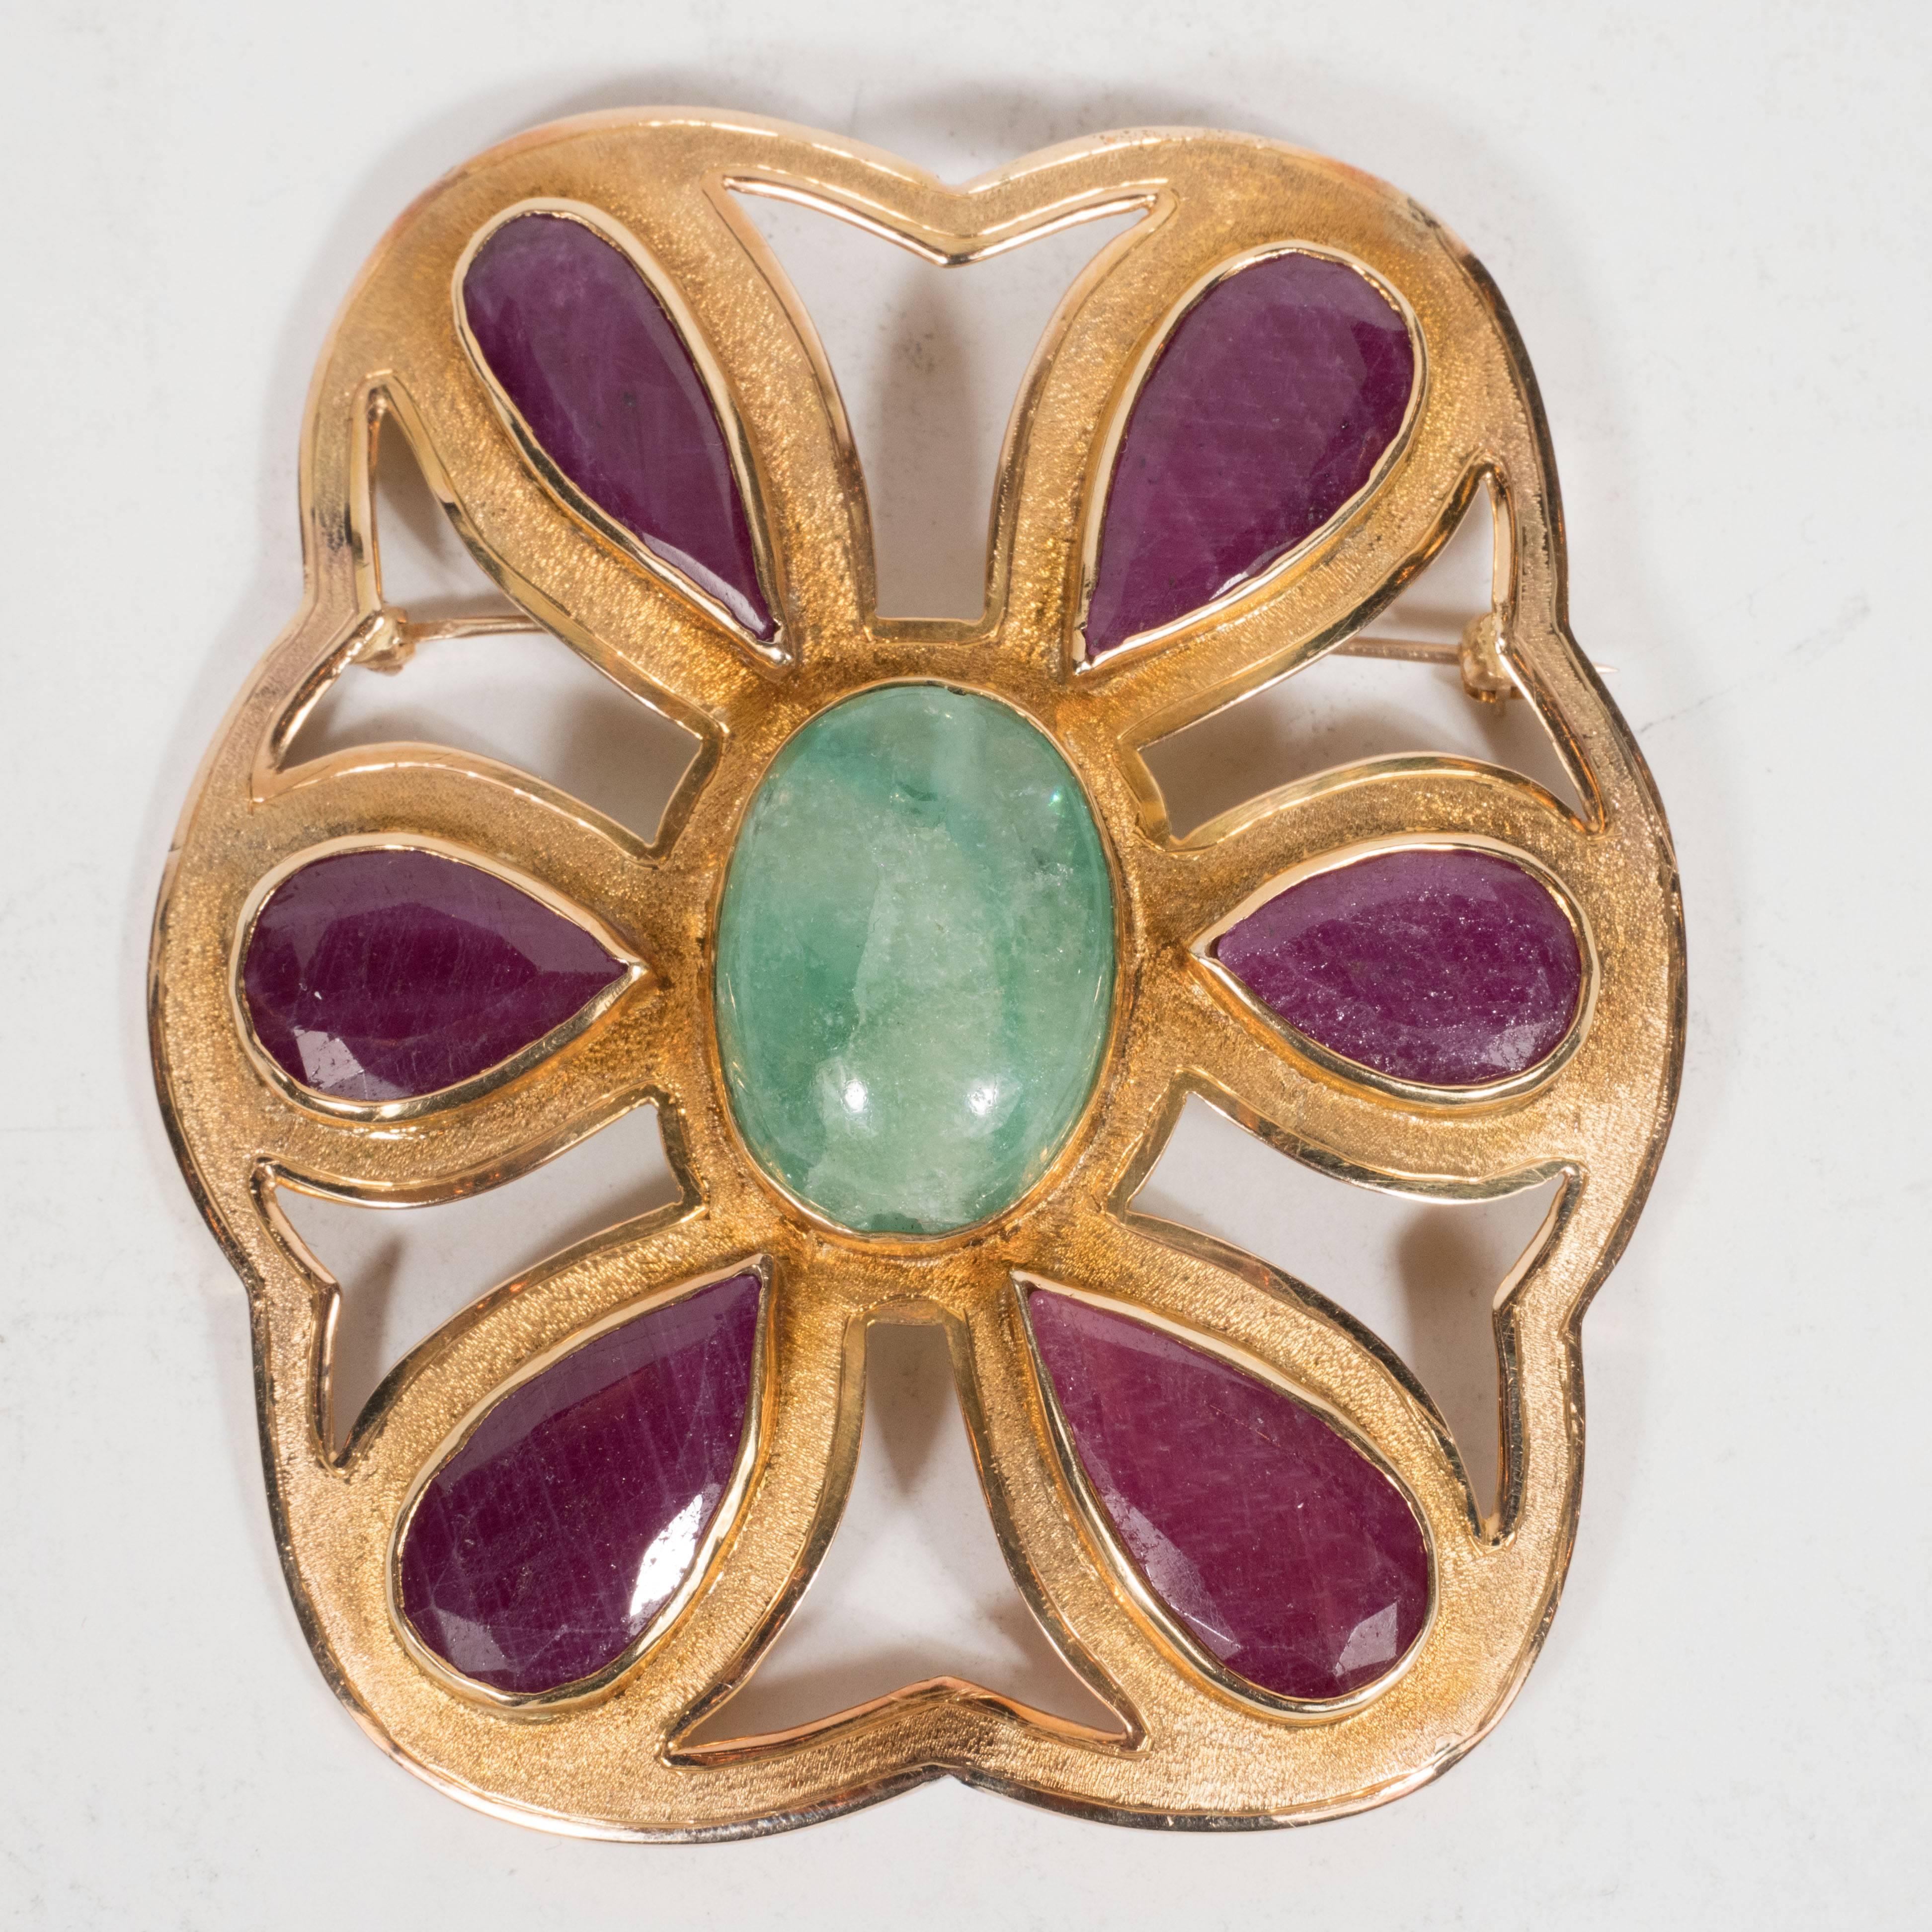 This superb Mid-Century Modernist brooch features six beveled pear cut rubies surrounding an ovoid cabochon emerald, set in brushed 14 karat yellow gold. The brooch includes scalloping along its sides and whale tale shaped cut-outs separating each